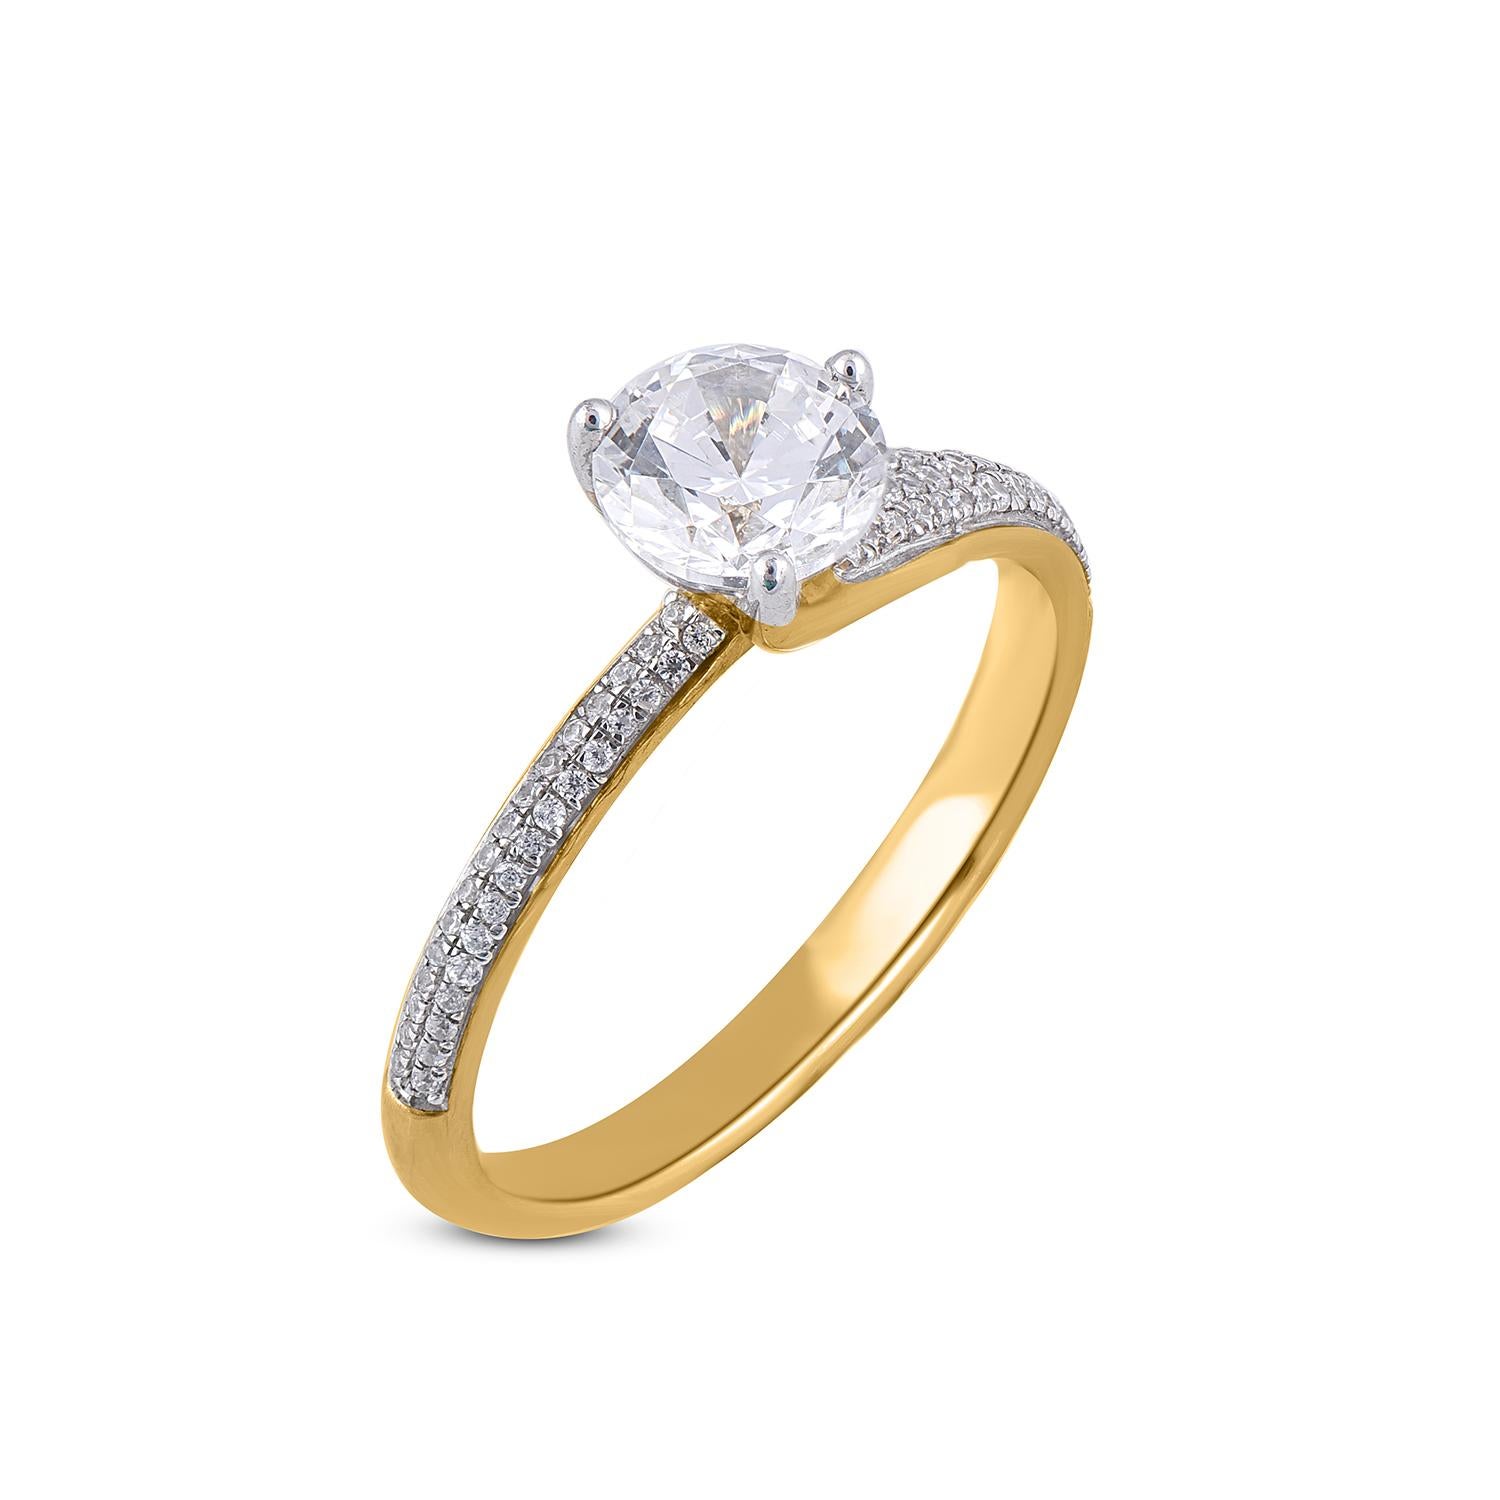 Give a touch of glamour to your fine jewelry collection with this Solitaire engagement ring. It features in 69 round diamond with 0.80 ct centre stone and 0.20 ct round diamond on shank set in micro pave and prong setting. The diamond are natural,